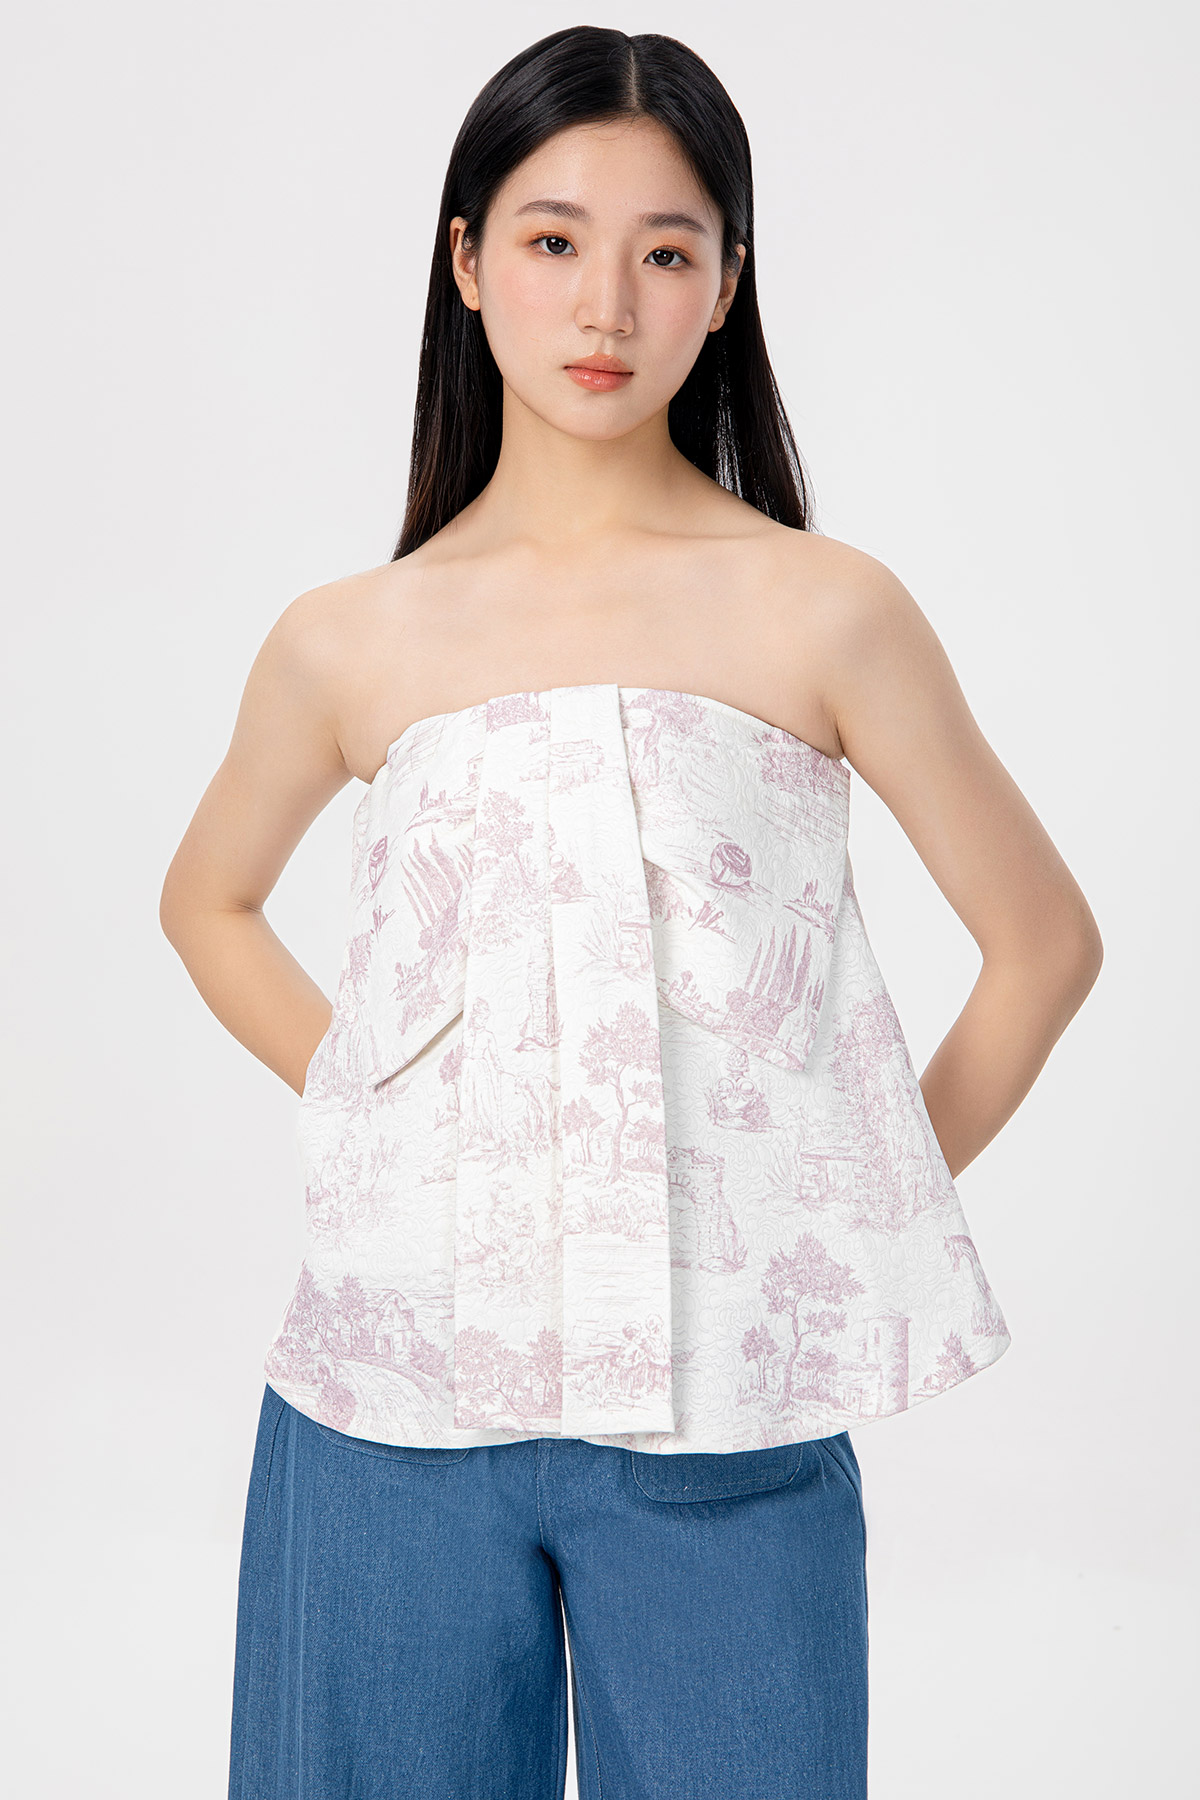 ROSELINE TOP - CHATEAU ROMANCE [BY MODPARADE]